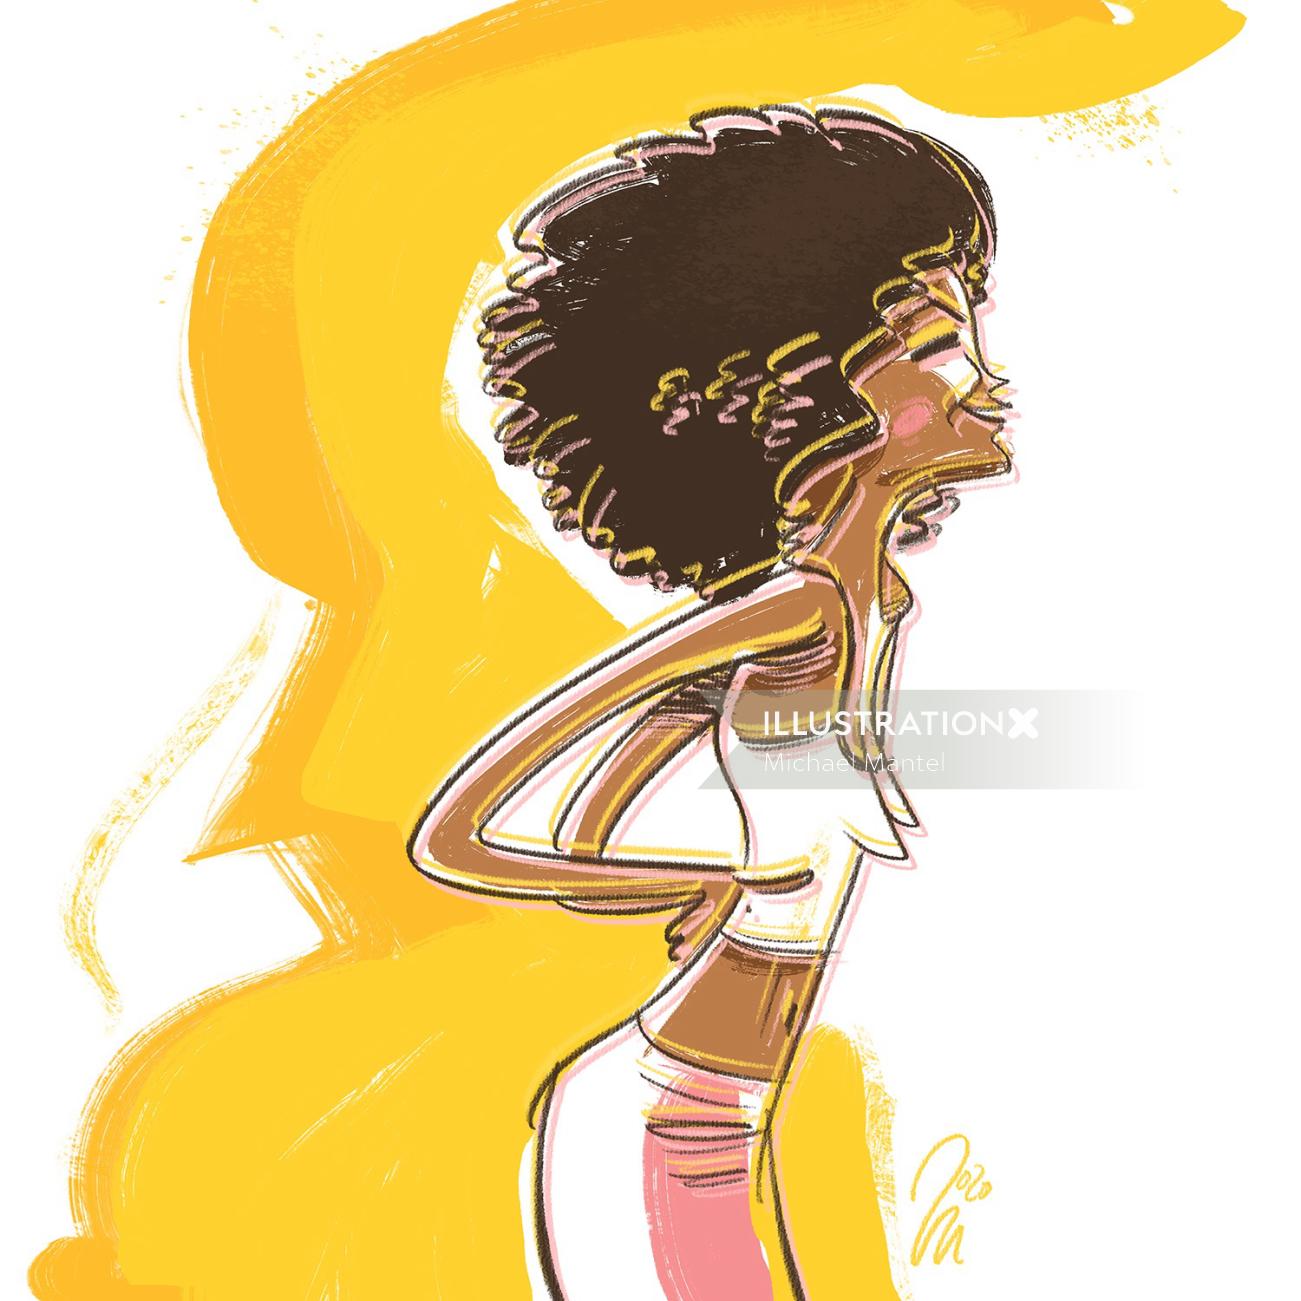 Editorial illustration of A Black Girl by Michael Mantel